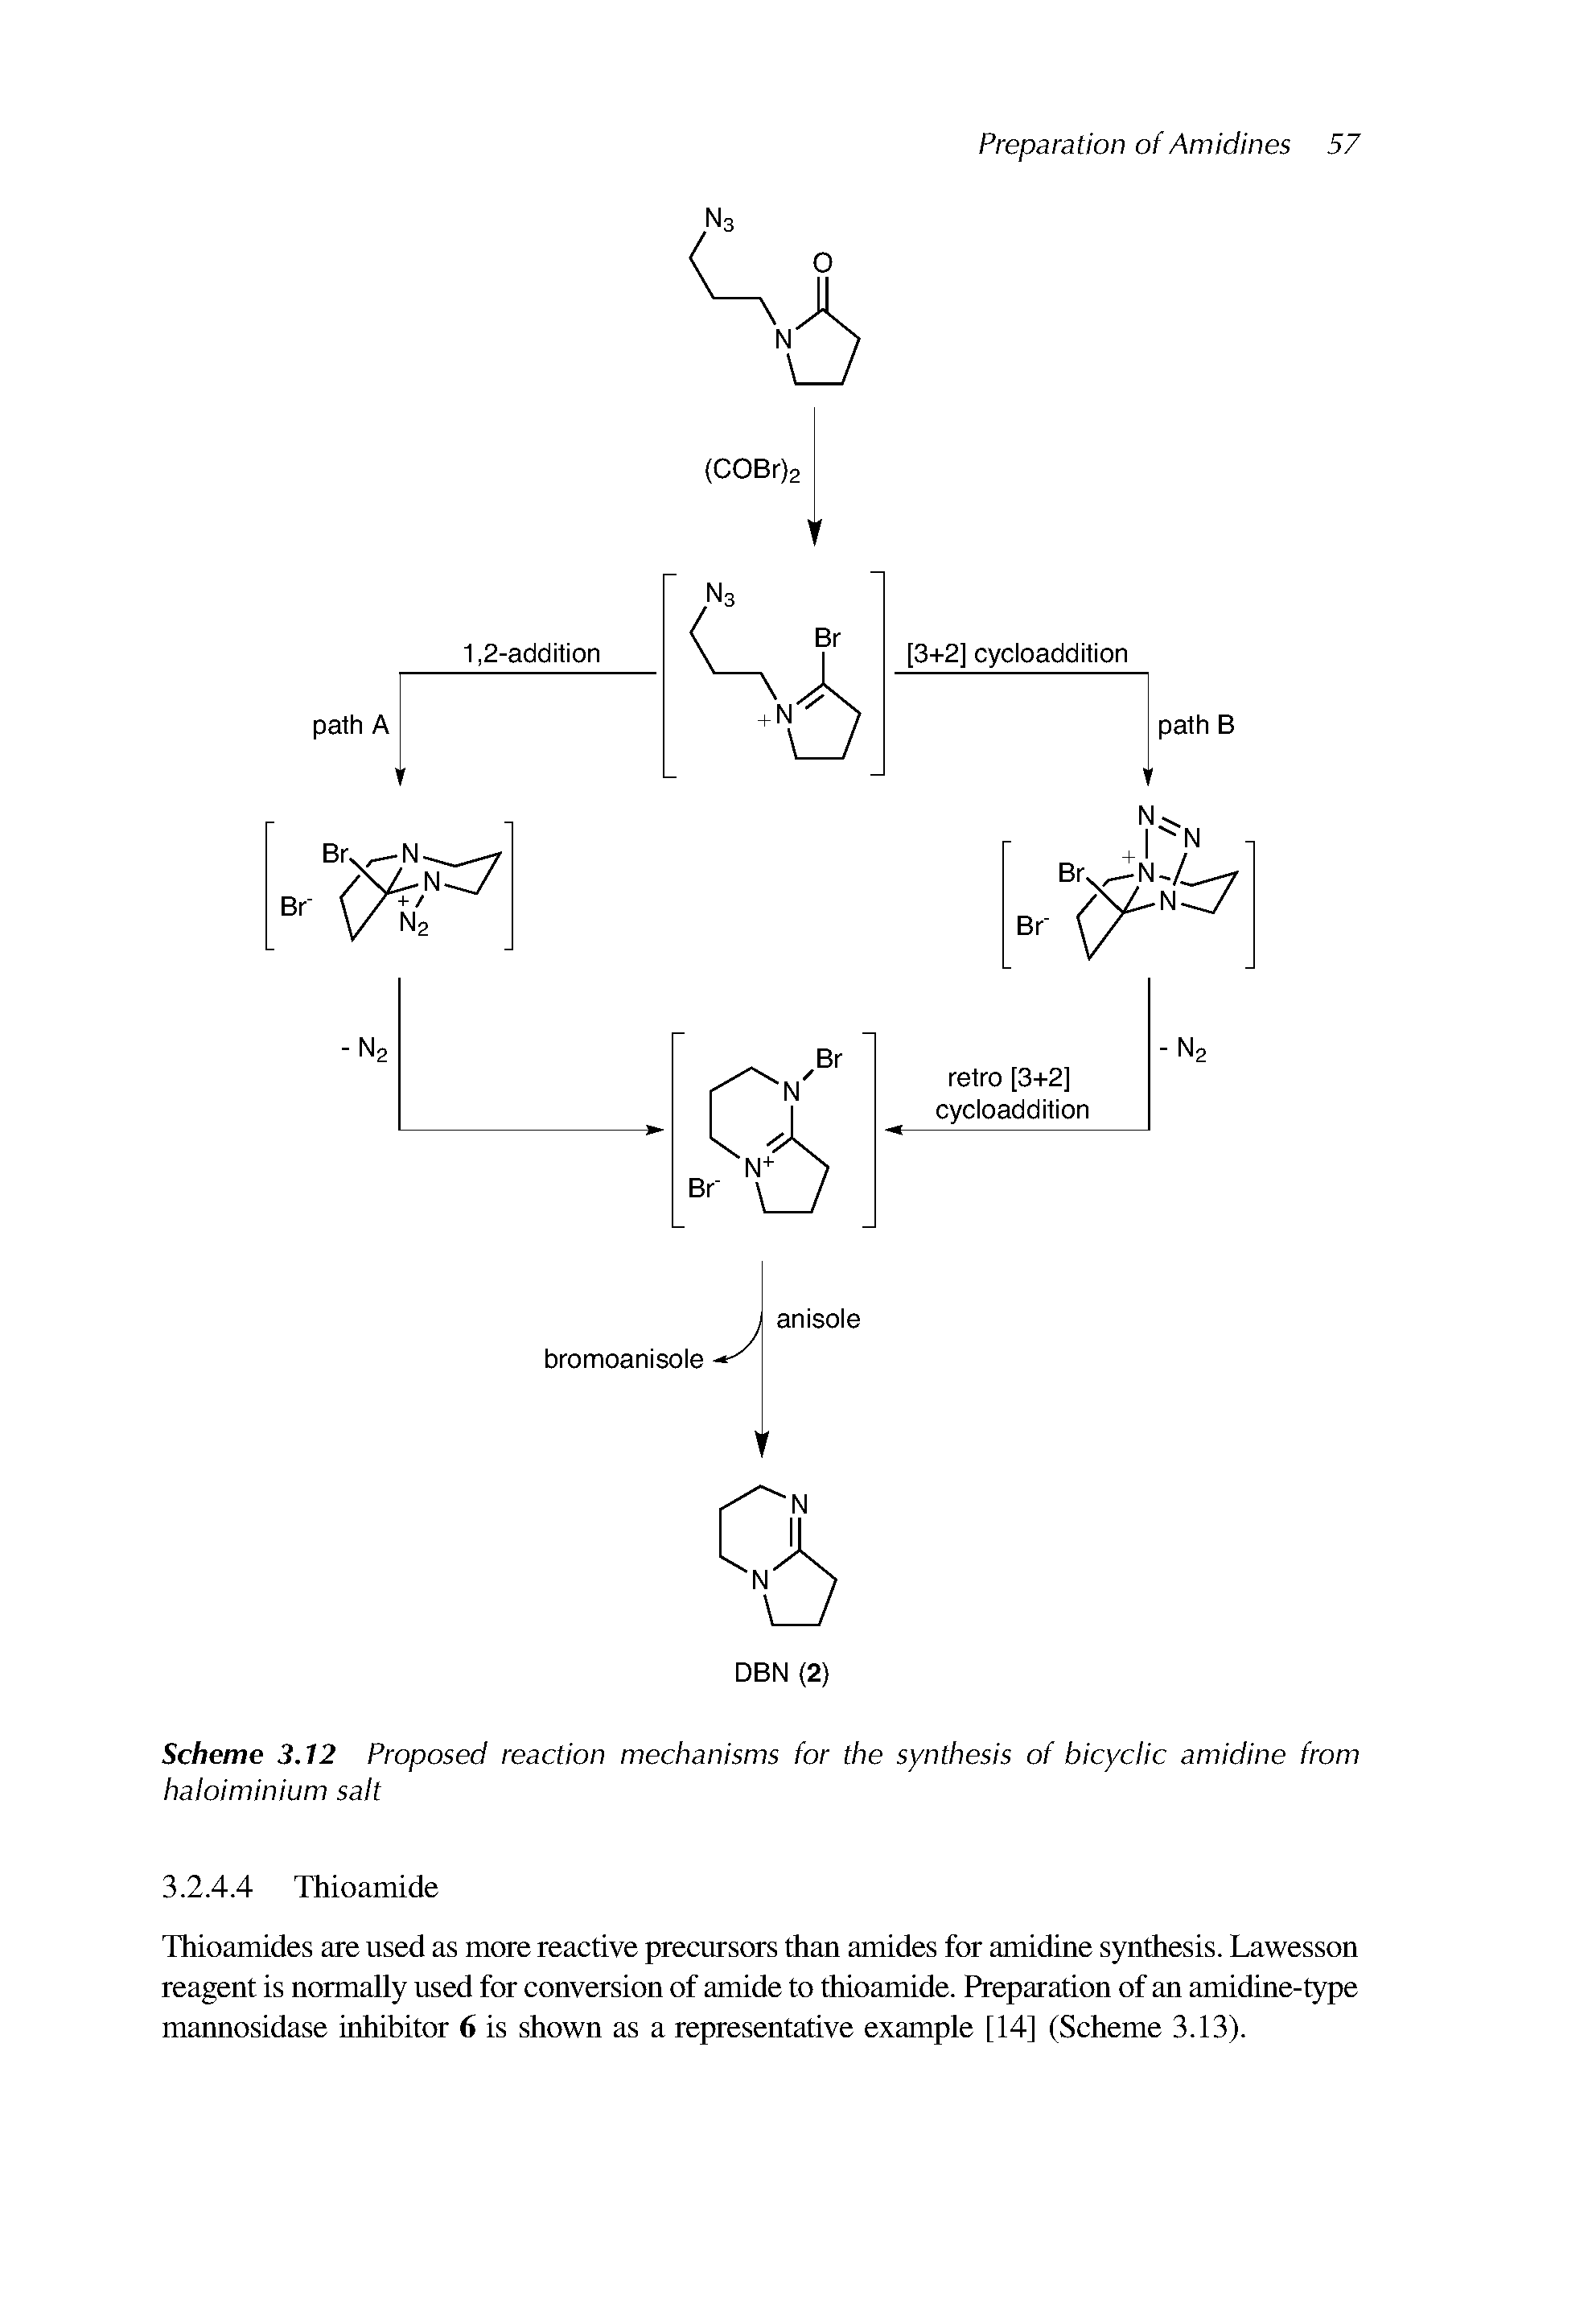 Scheme 3.12 Proposed reaction mechanisms for the synthesis of bicyclic amidine from haloiminium salt...